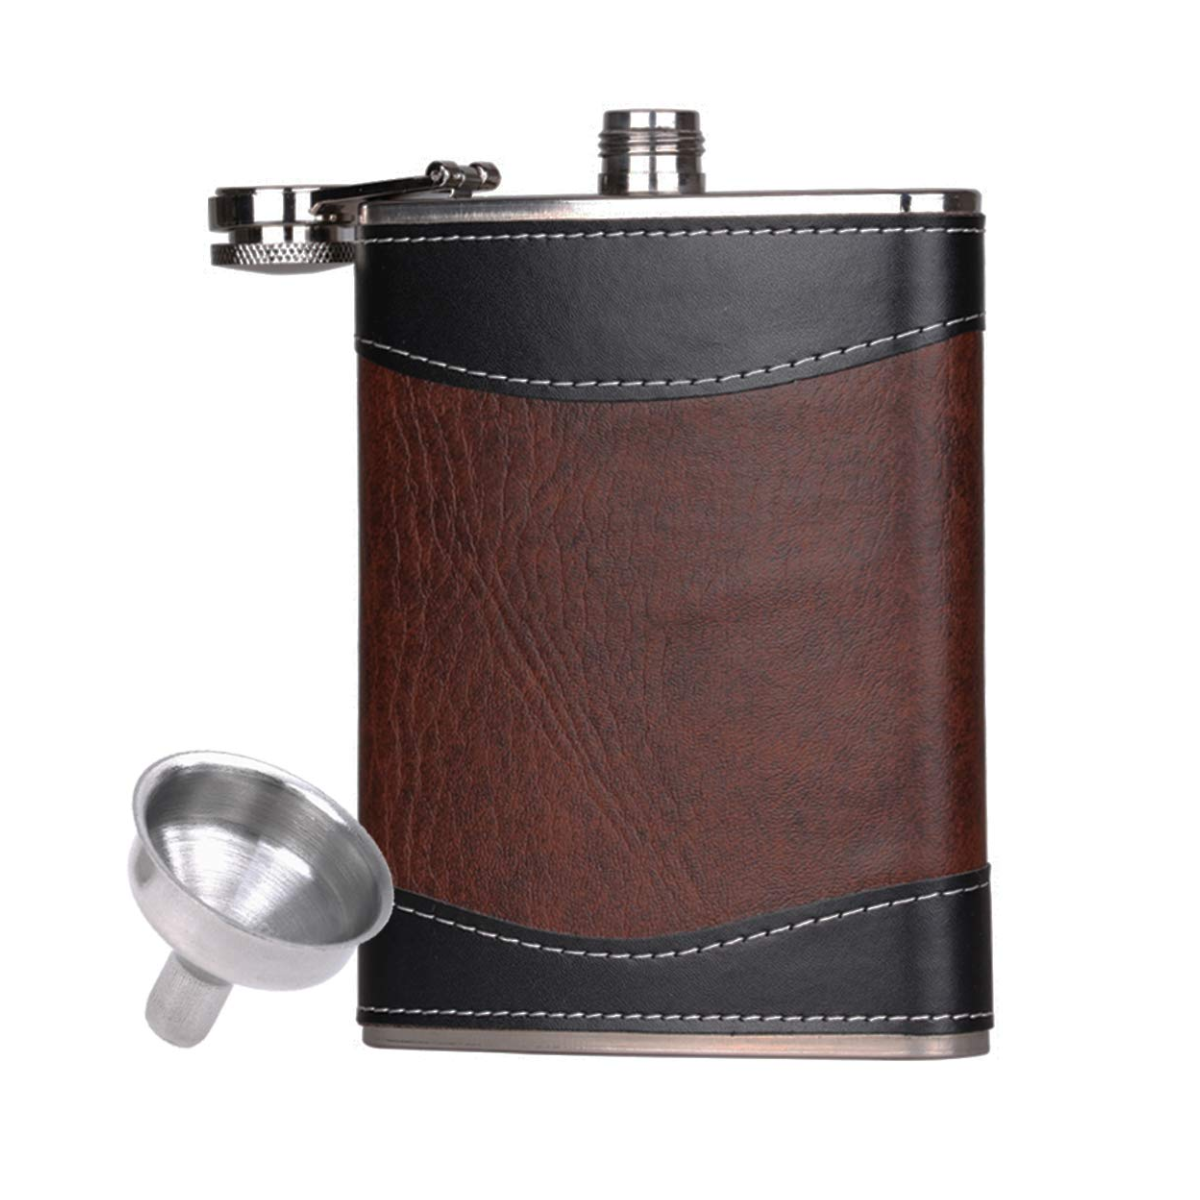 17. Raise a Toast to 3 Years of Love with a Personalized Leather Flask